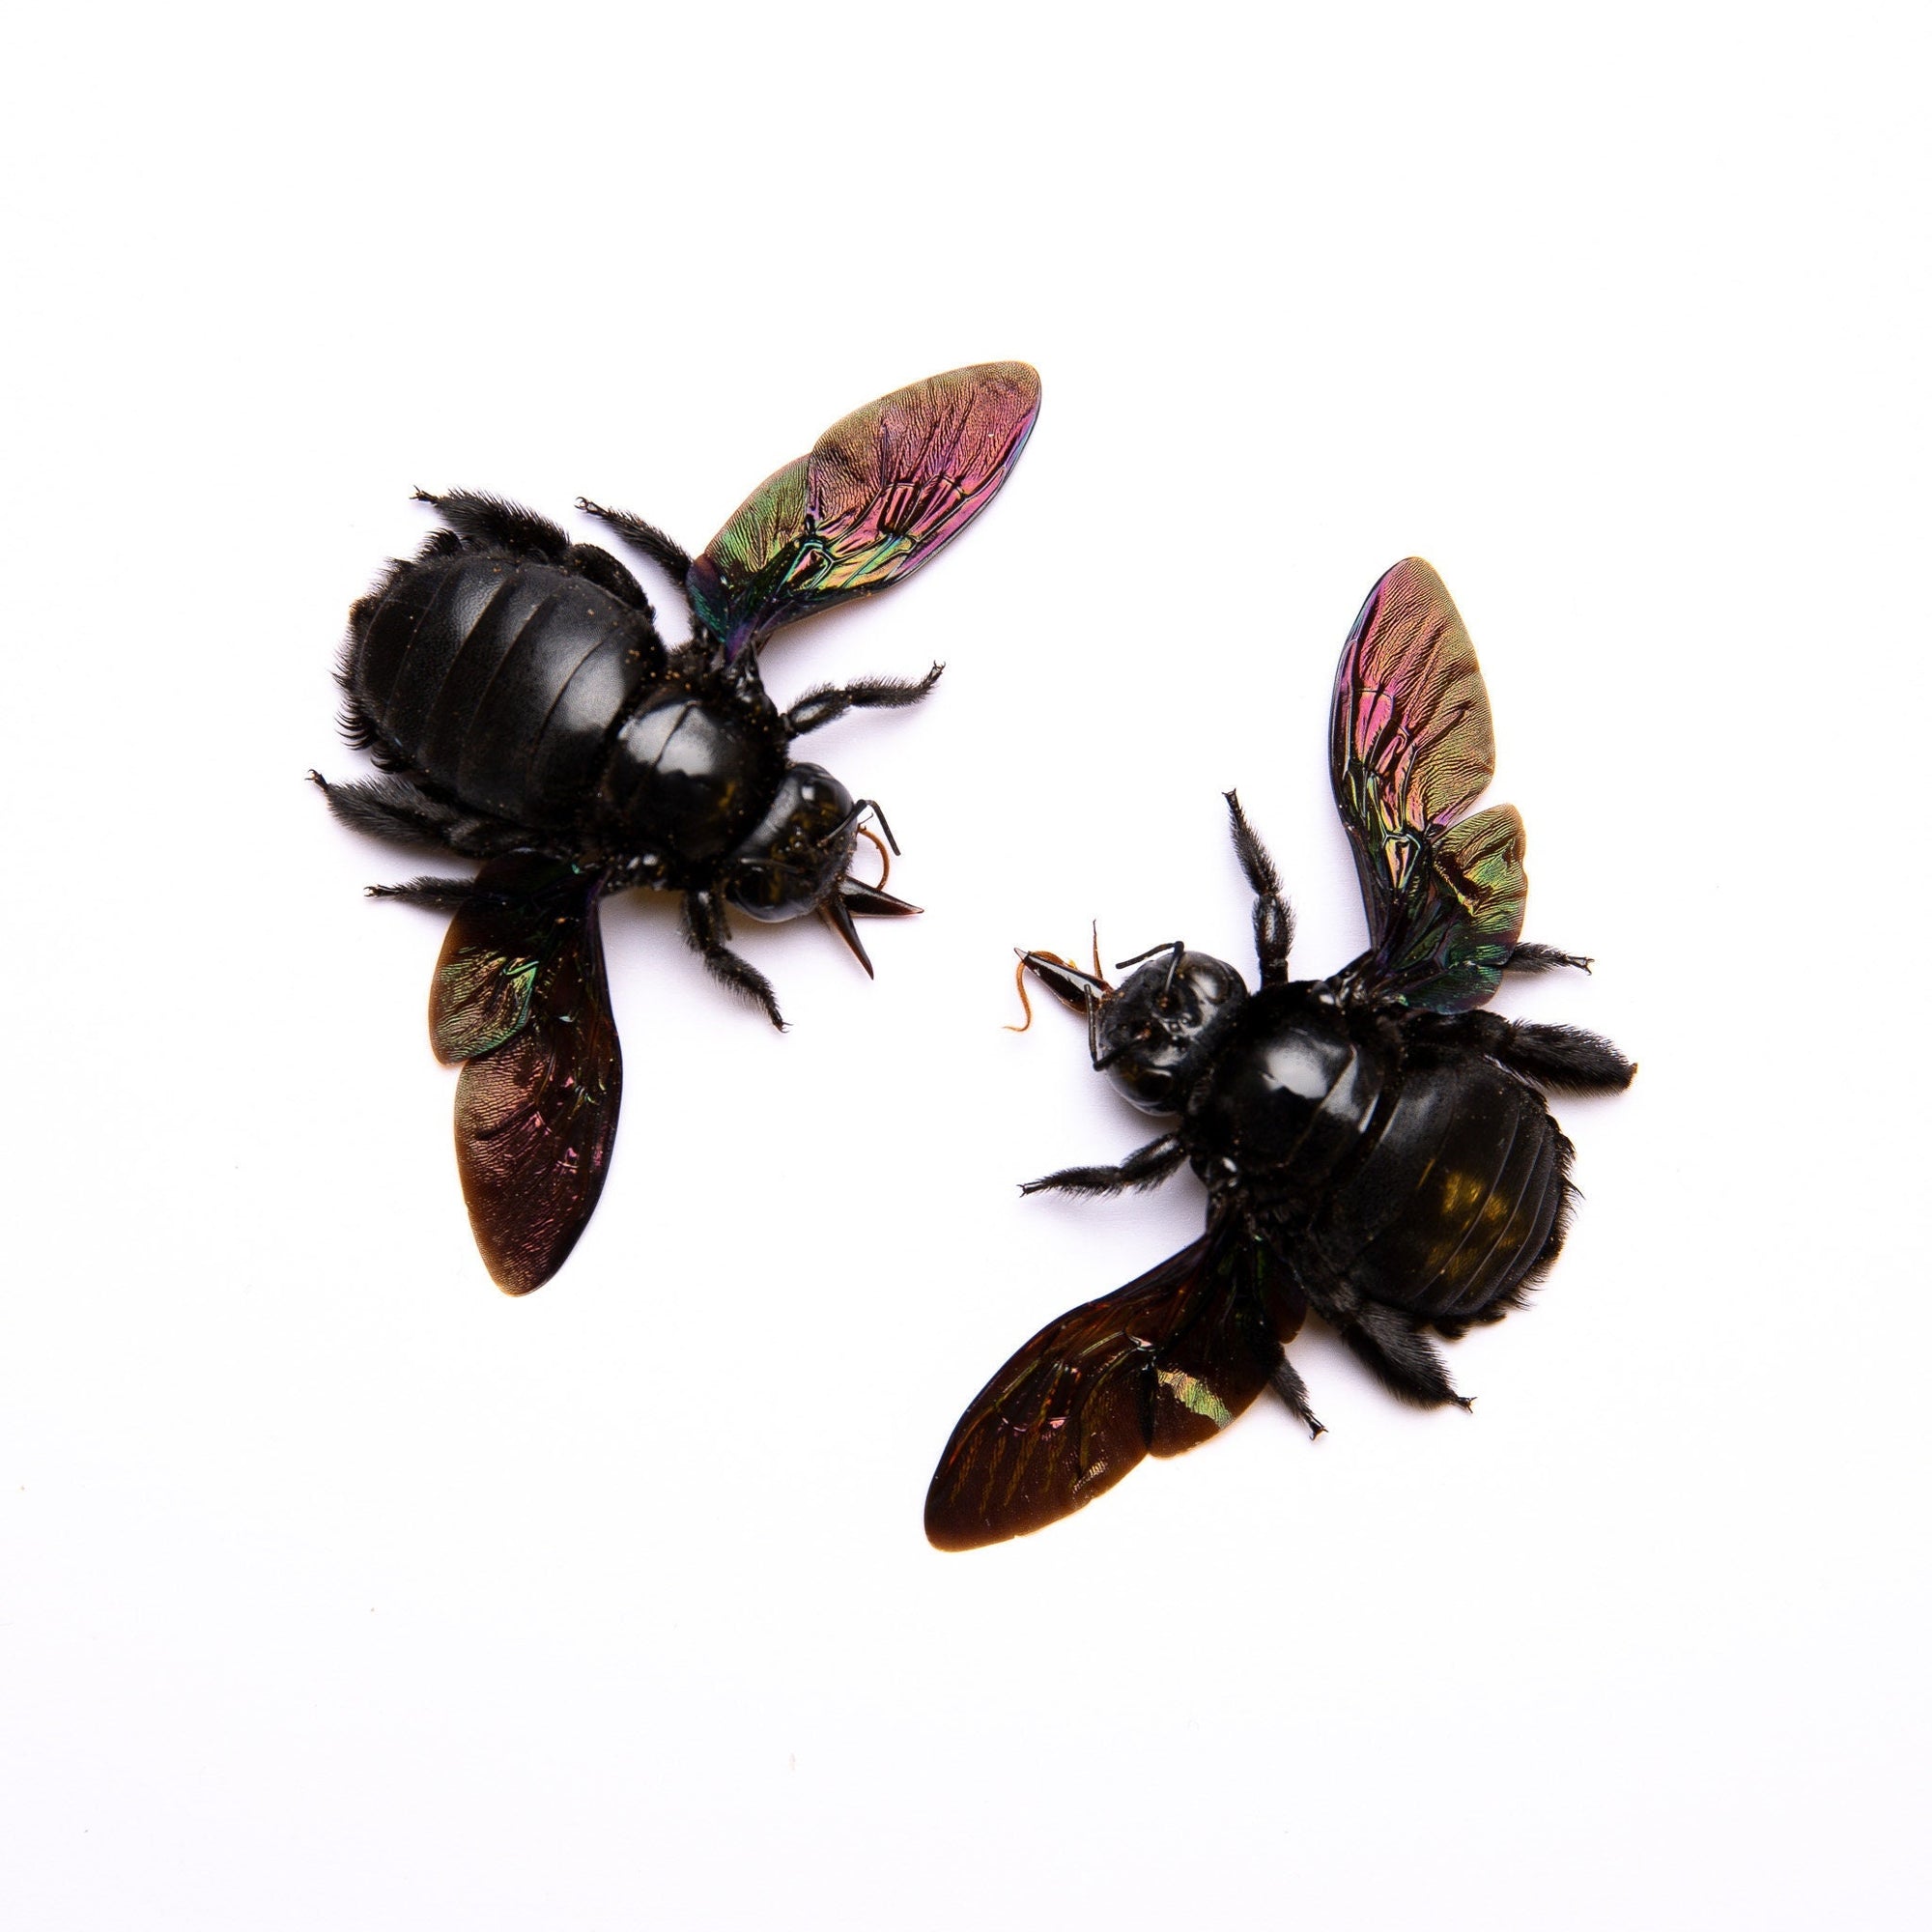 TWO (2) Giant Black Carpenter Bees (Xylocopa latipes) | A1 Spread Specimens | Indonesia Java Bumblebee | Dry-preserved Taxidermy